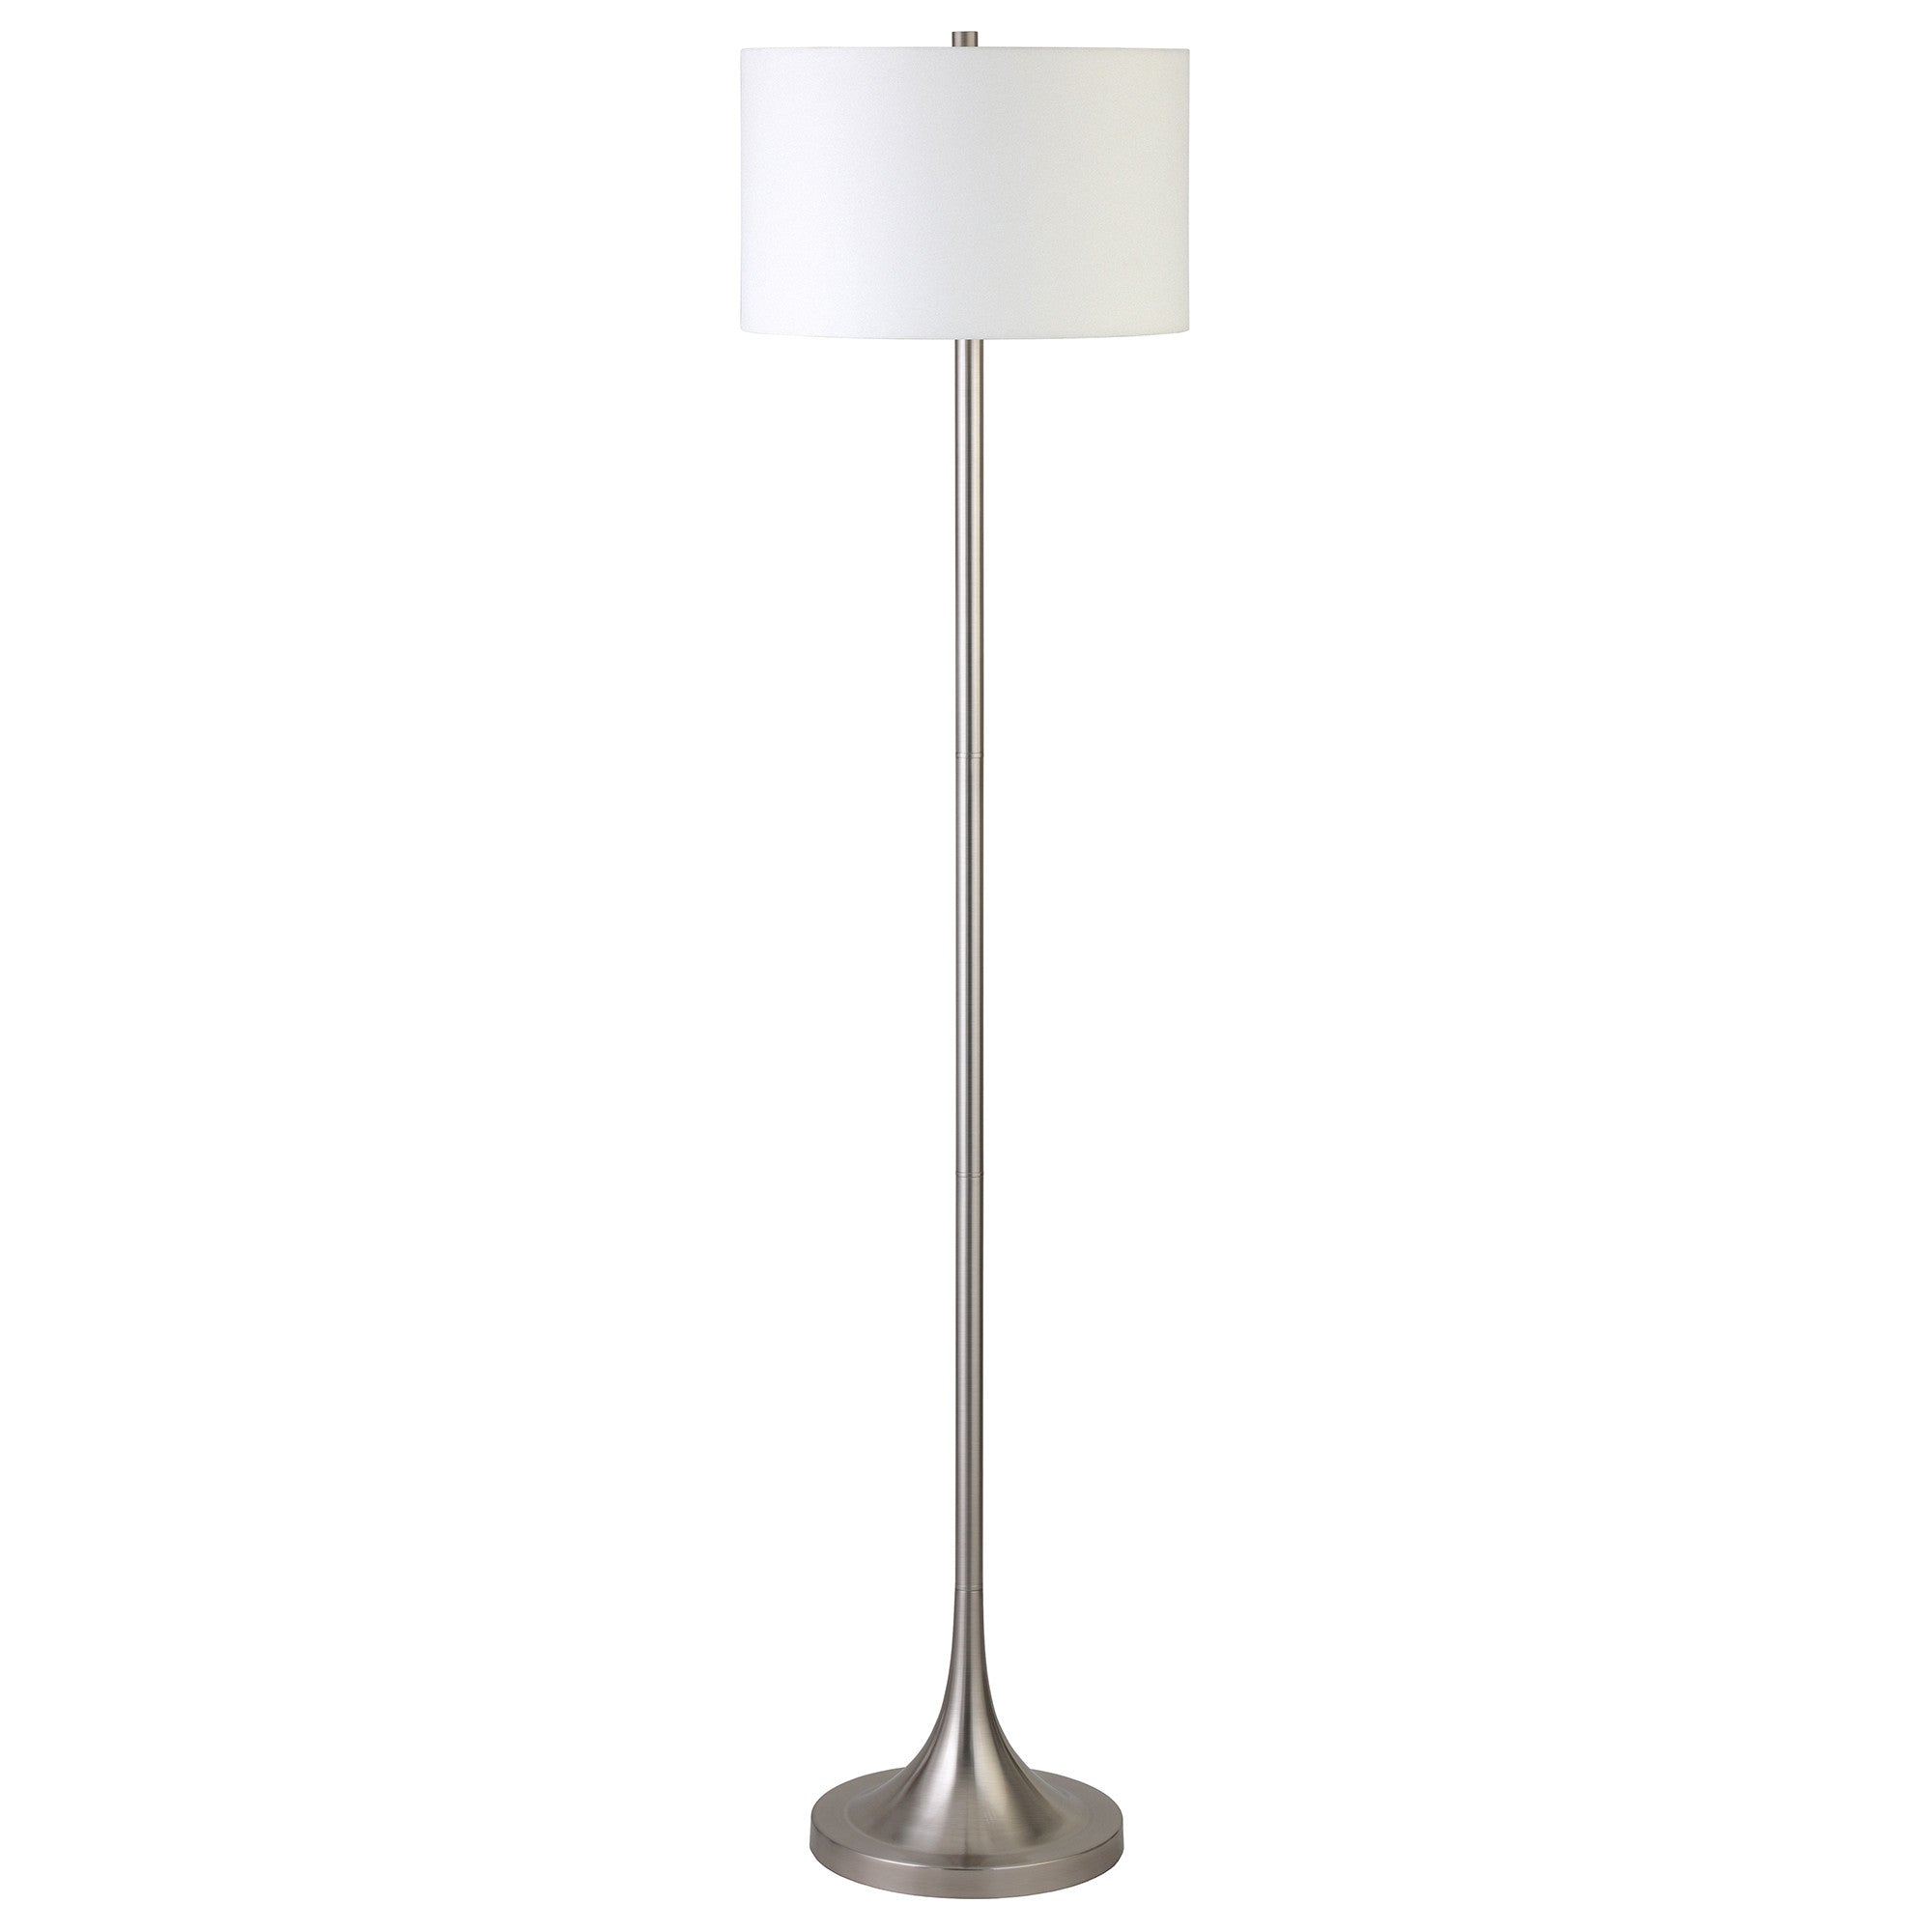 62" Nickel Traditional Shaped Floor Lamp With White Frosted Glass Drum Shade